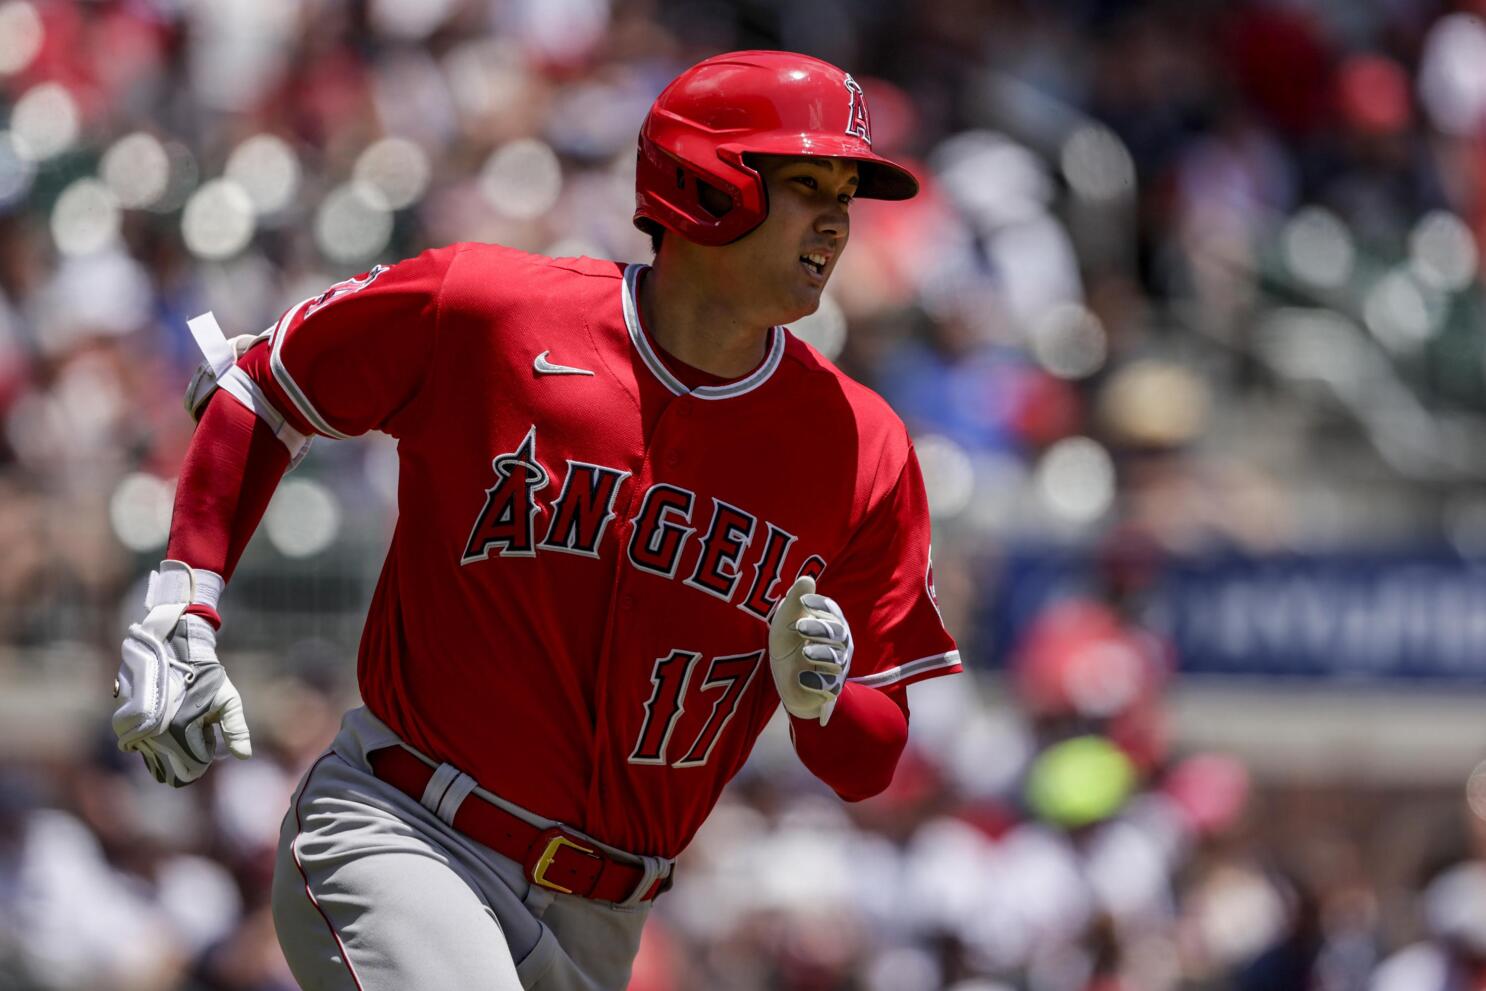 Taylor Ward carted off after taking a pitch to face in Angels